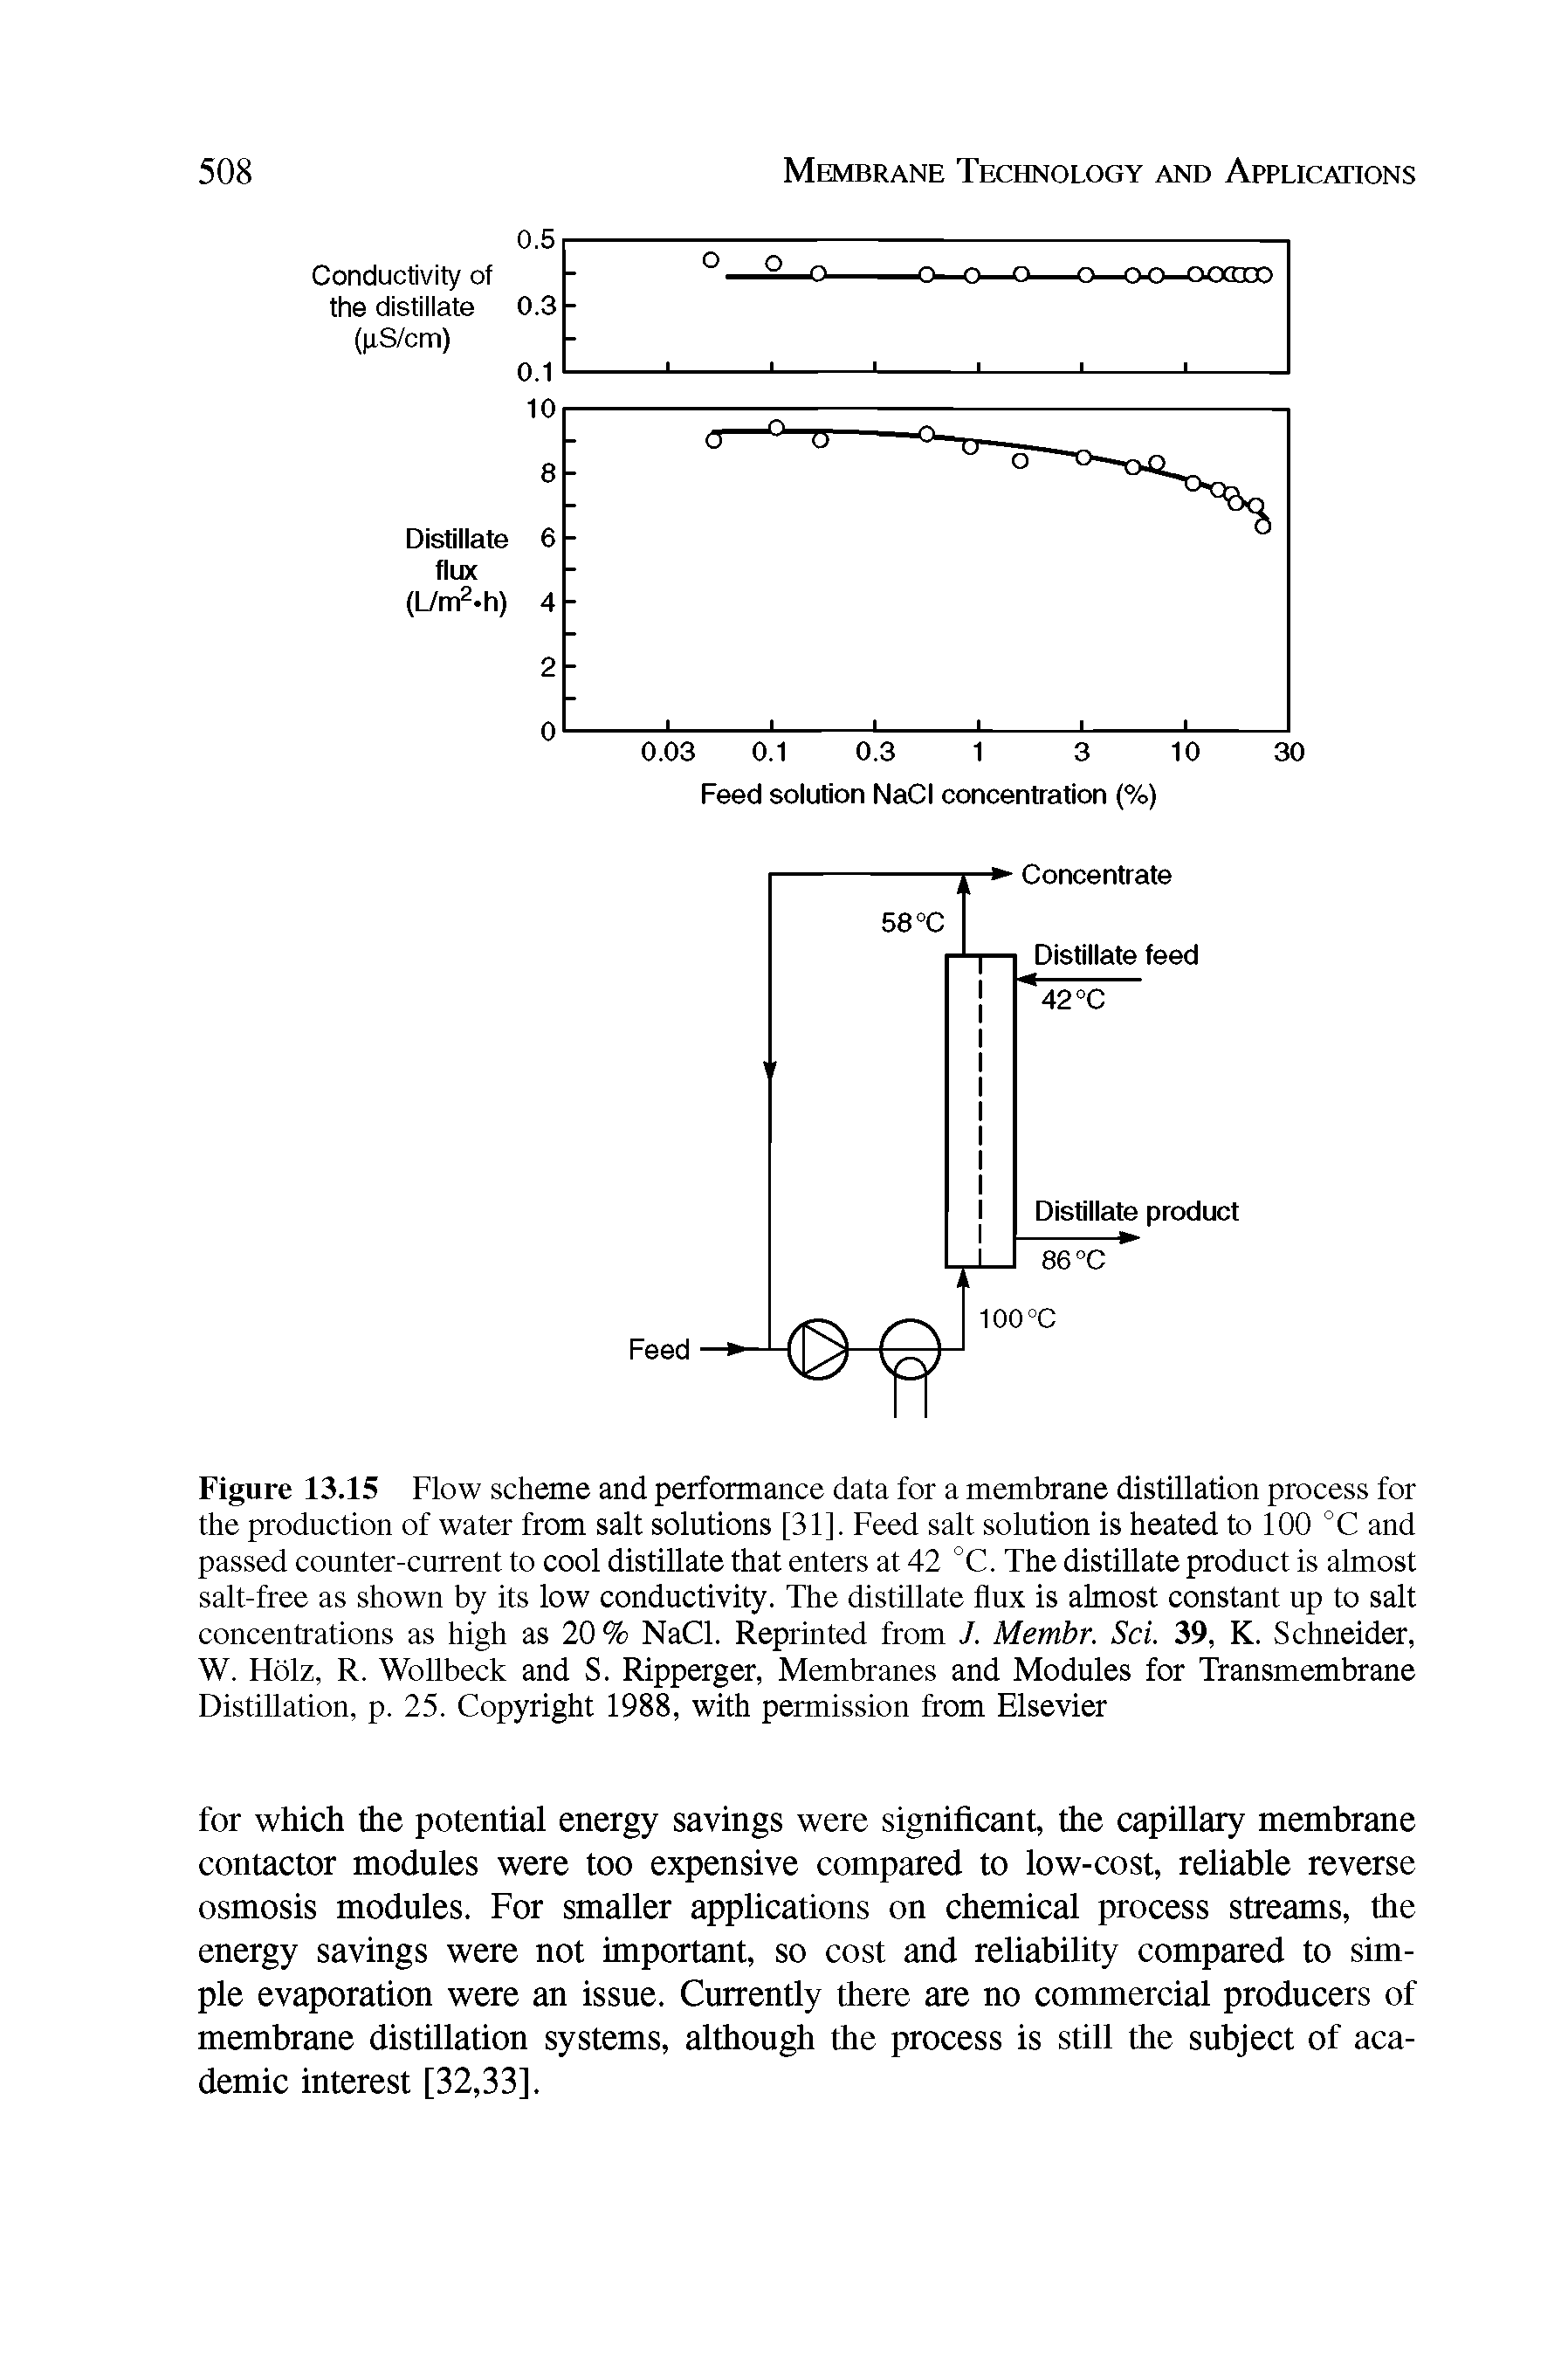 Figure 13.15 Flow scheme and performance data for a membrane distillation process for the production of water from salt solutions [31]. Feed salt solution is heated to 100 °C and passed counter-current to cool distillate that enters at 42 °C. The distillate product is almost salt-free as shown by its low conductivity. The distillate flux is almost constant up to salt concentrations as high as 20 % NaCI. Reprinted from J. Membr. Sci. 39, K. Schneider, W. Holz, R. Wollbeck and S. Ripperger, Membranes and Modules for Transmembrane Distillation, p. 25. Copyright 1988, with permission from Elsevier...